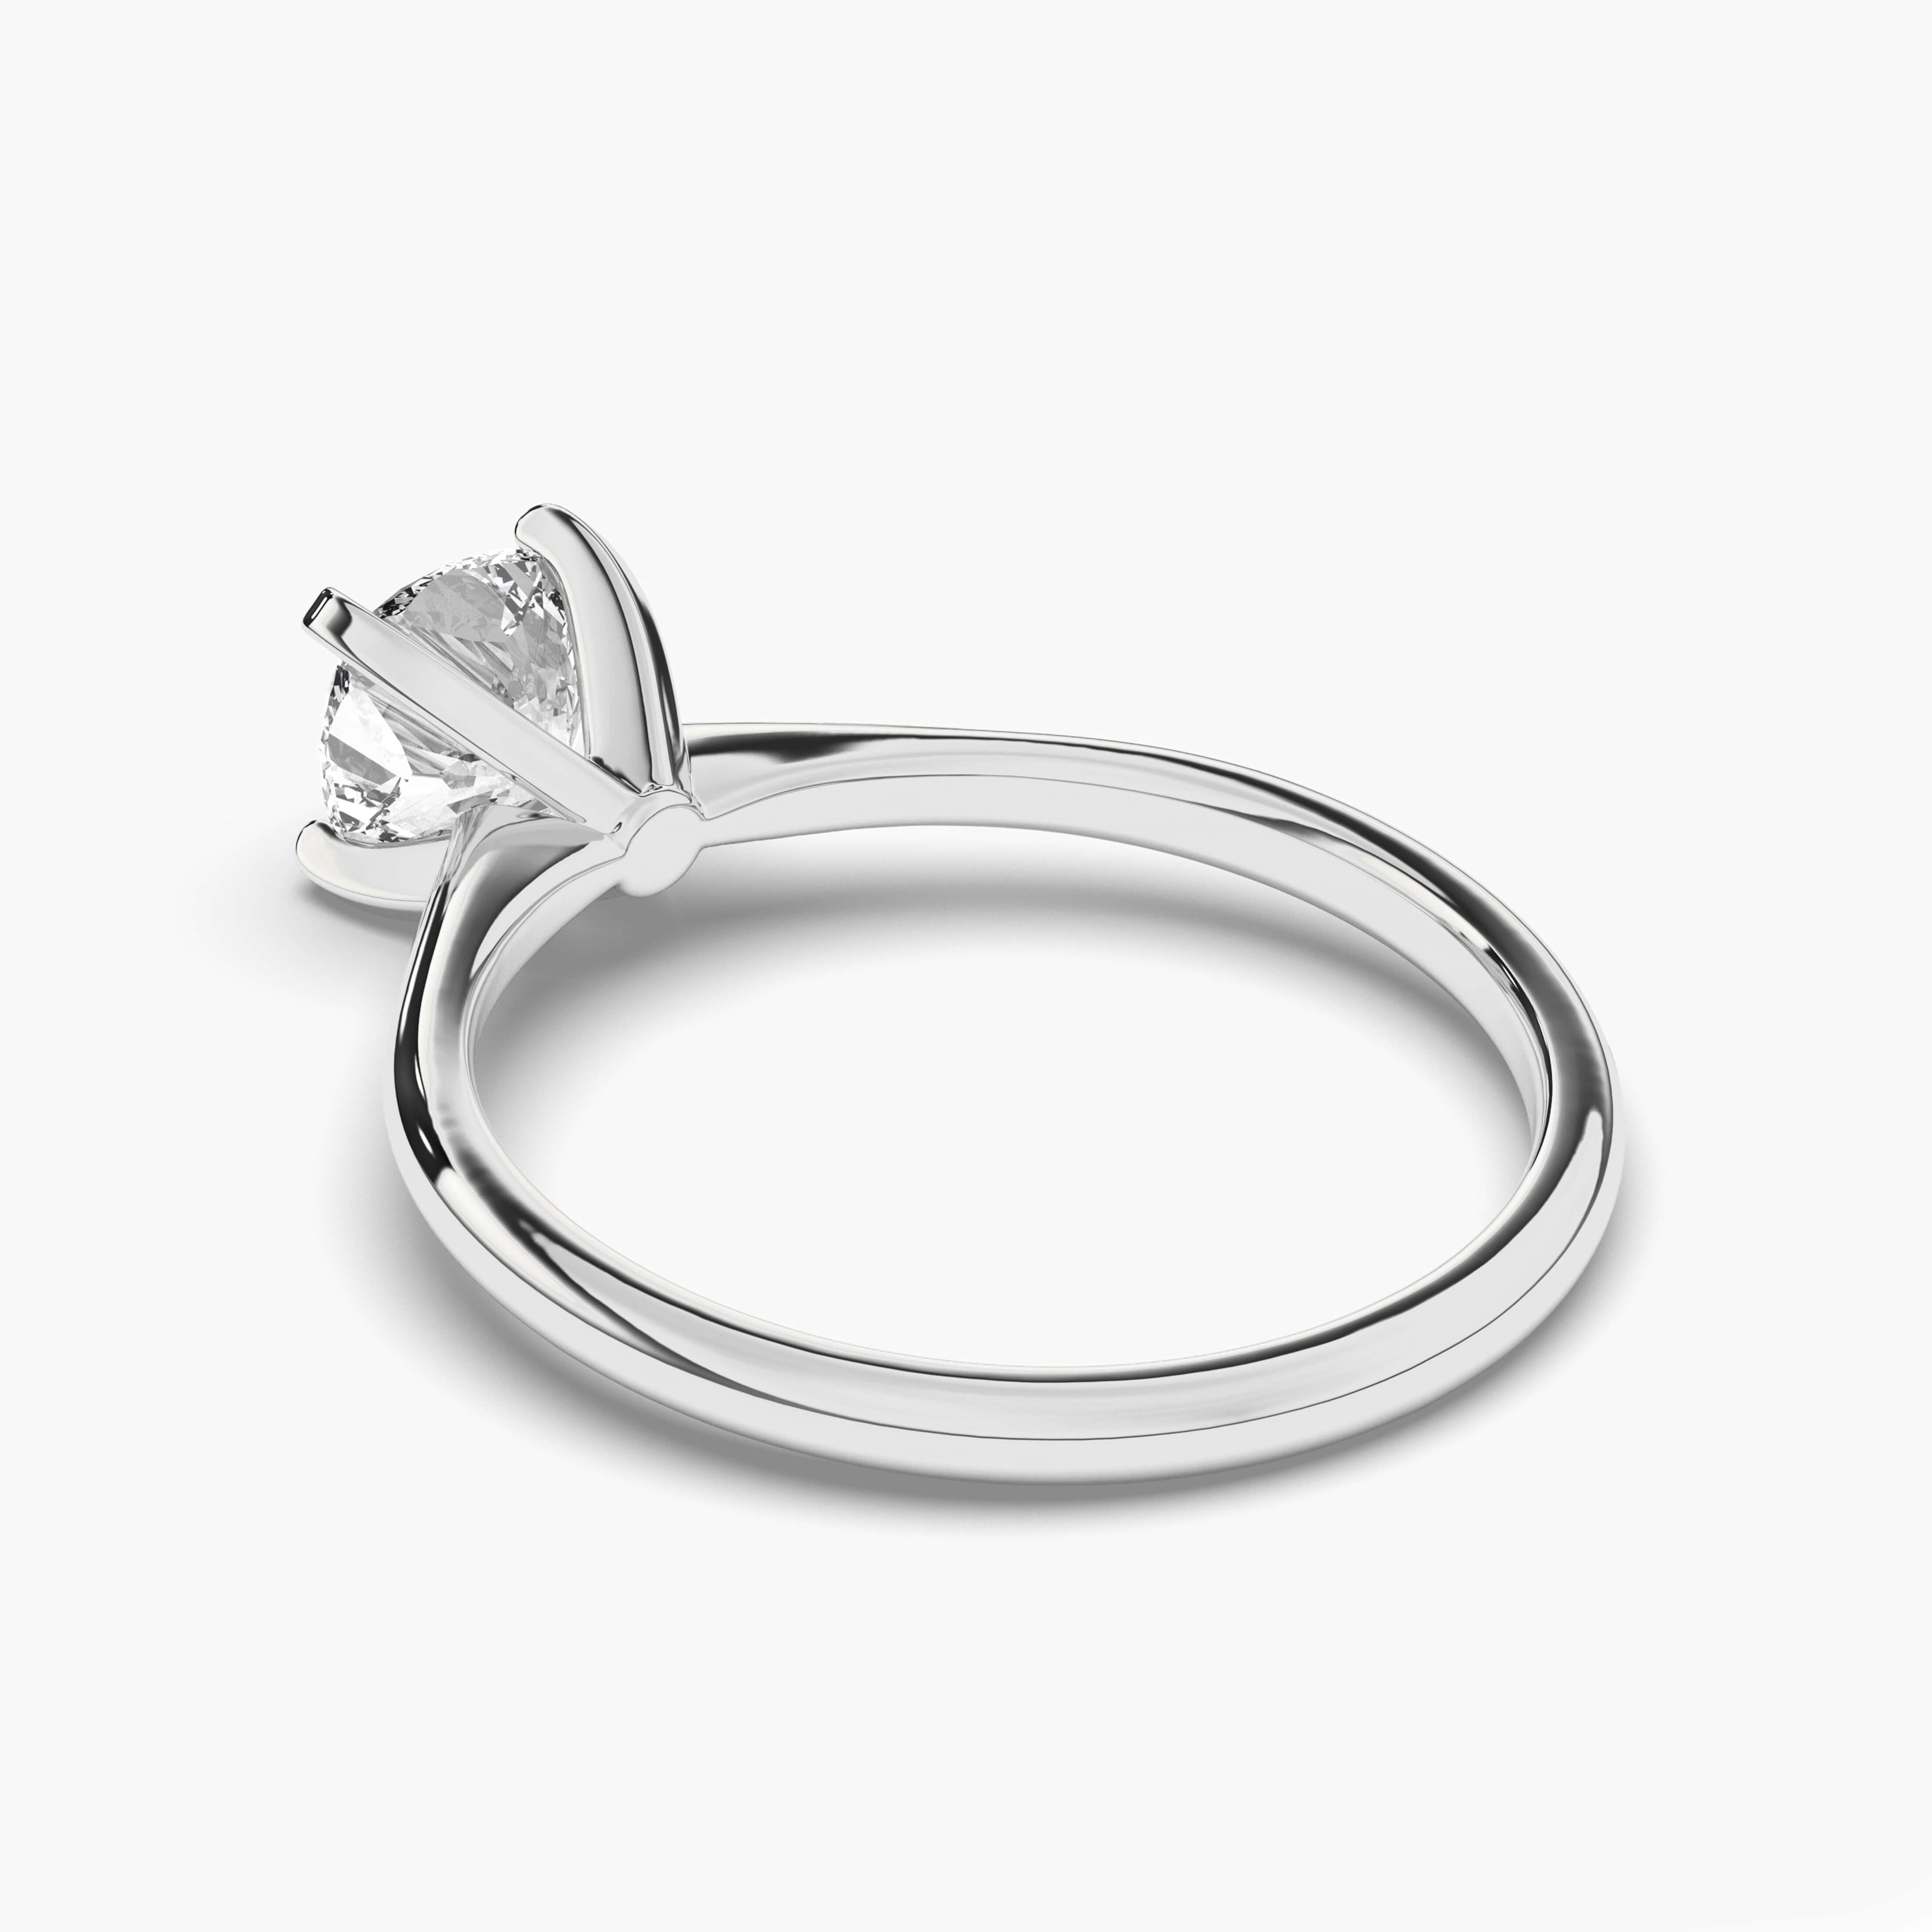 CUSHION CUT DIAMOND SOLITAIRE PRONG ENGAGEMENT RING IN WHITE GOLD